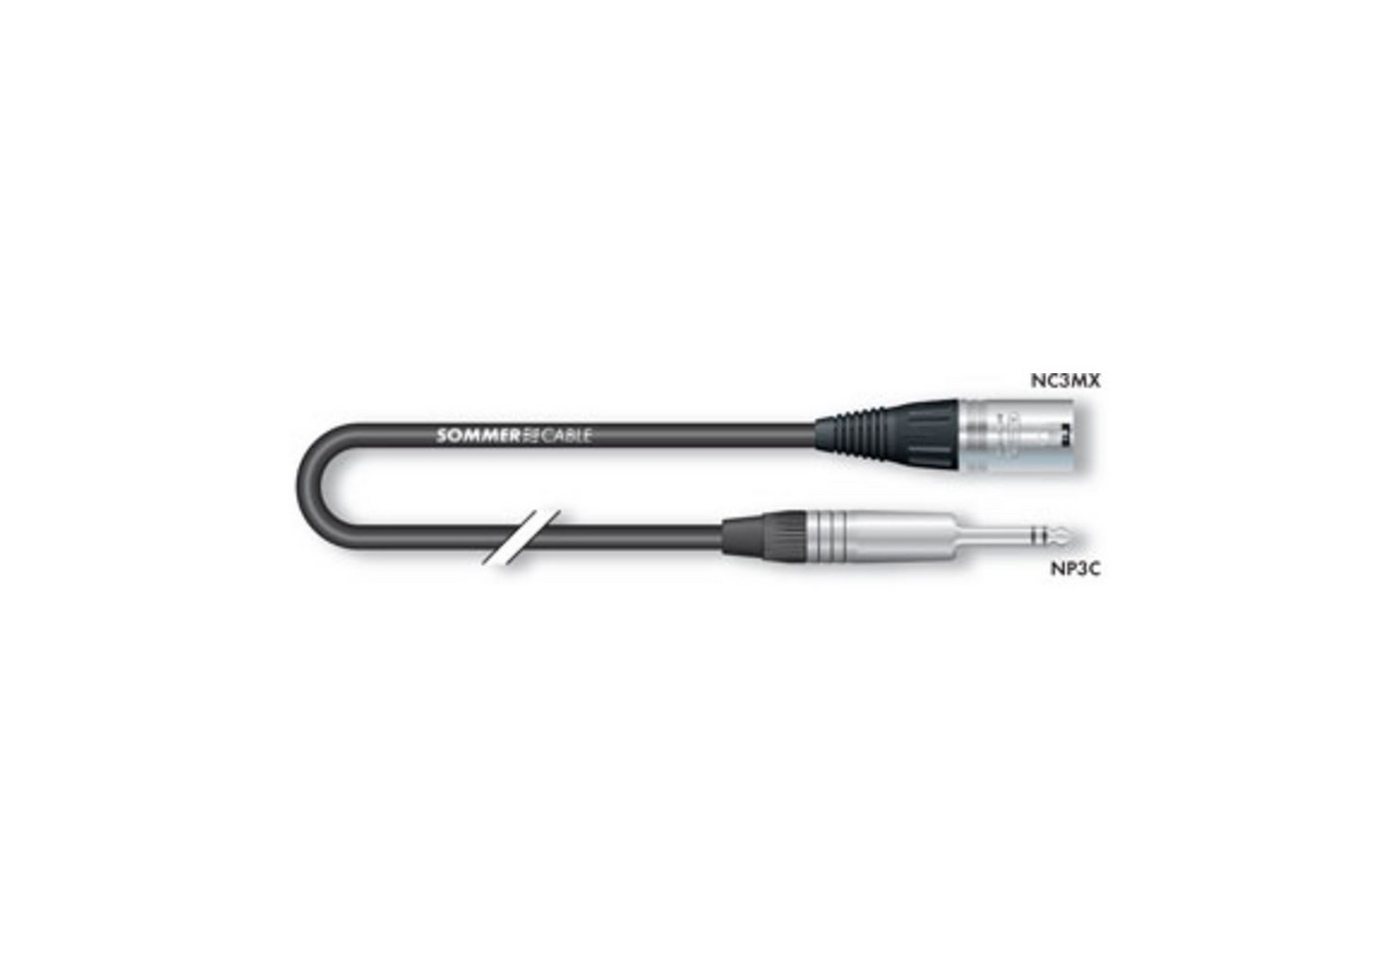 Sommer Cable Audio-Kabel, SG04-0050-SW Stage 22 Mikrofonkabel 0,5 m - Mikrofonkabel von Sommer Cable